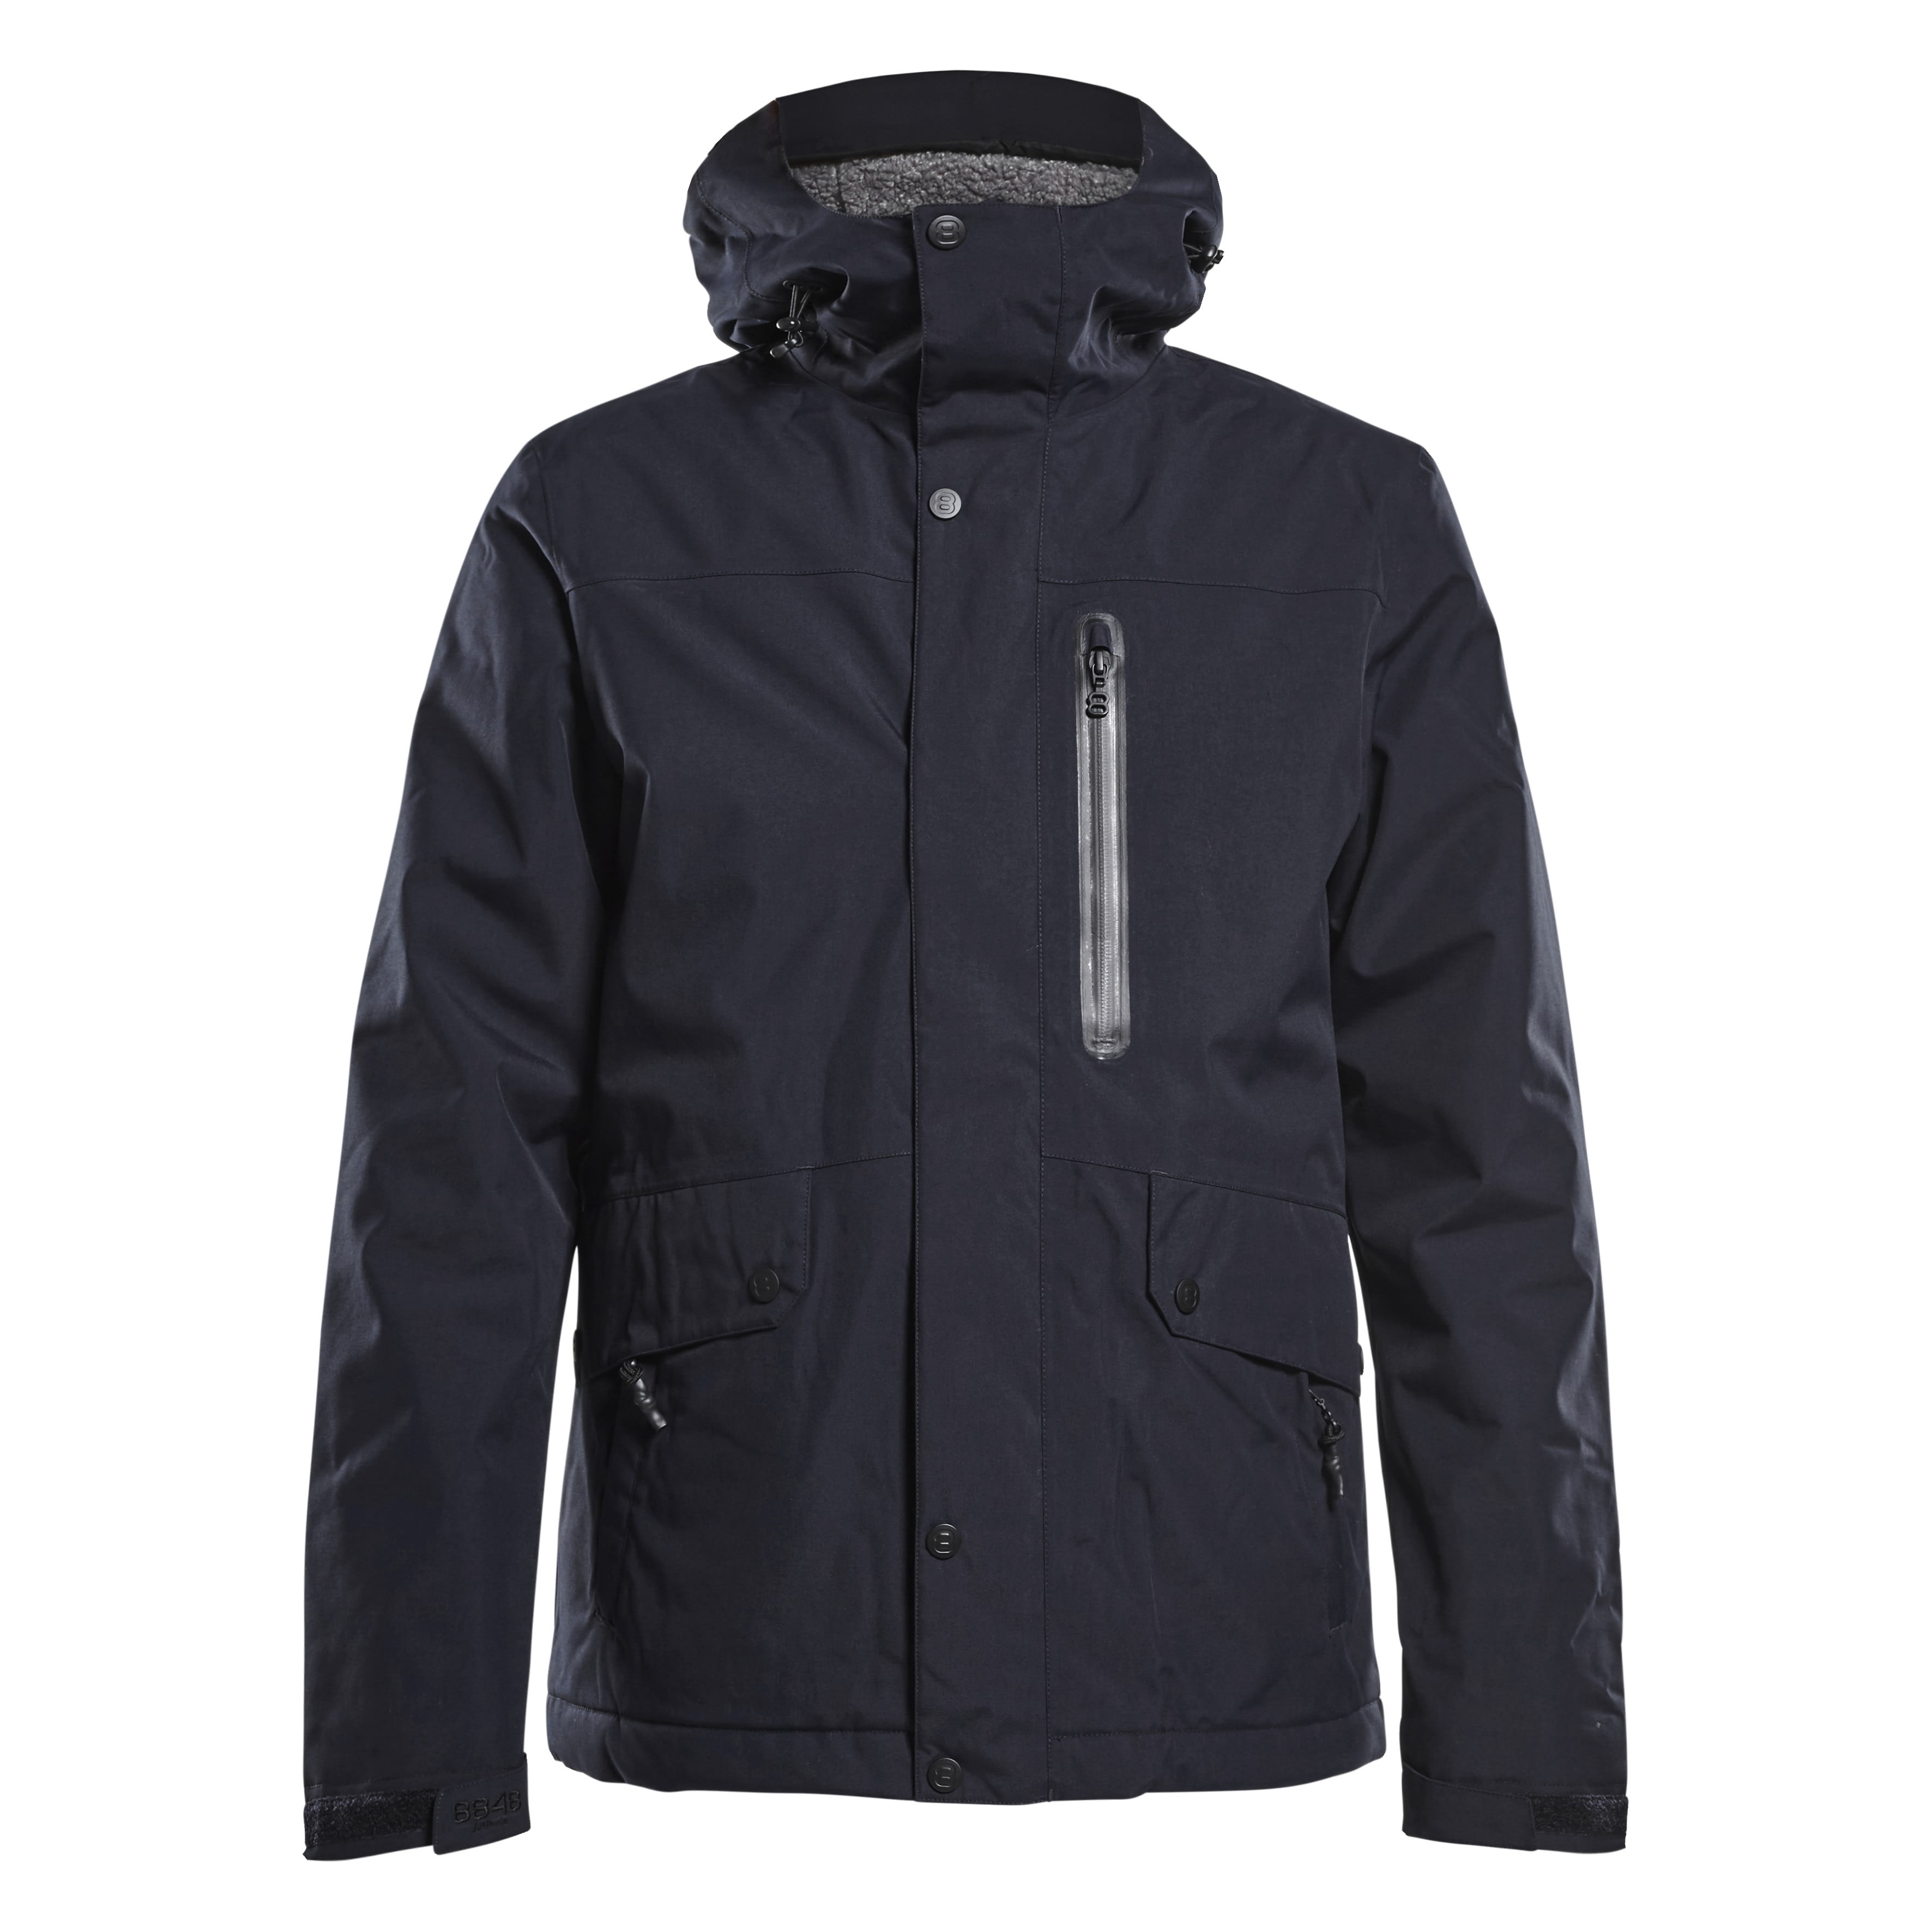 Buy 8848 Altitude Chester Jacket